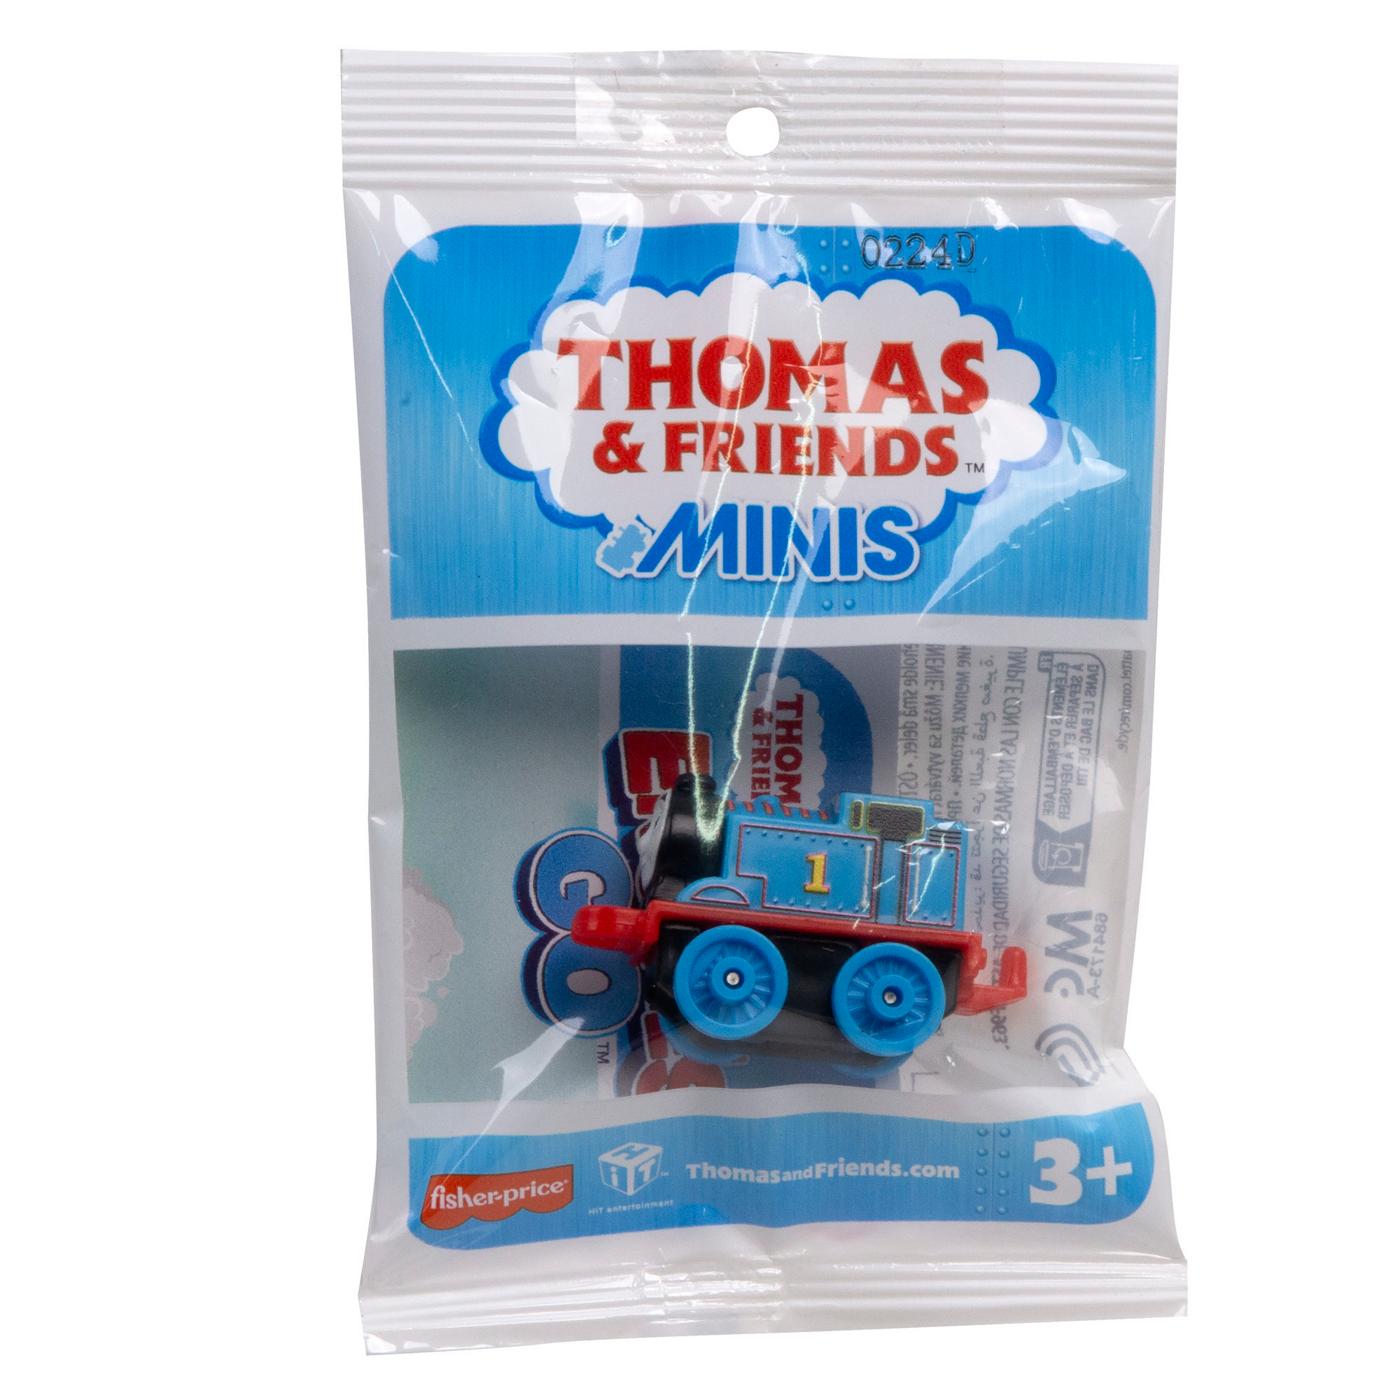 Fisher-Price Thomas & Friends Minis Blind Bag; image 1 of 9